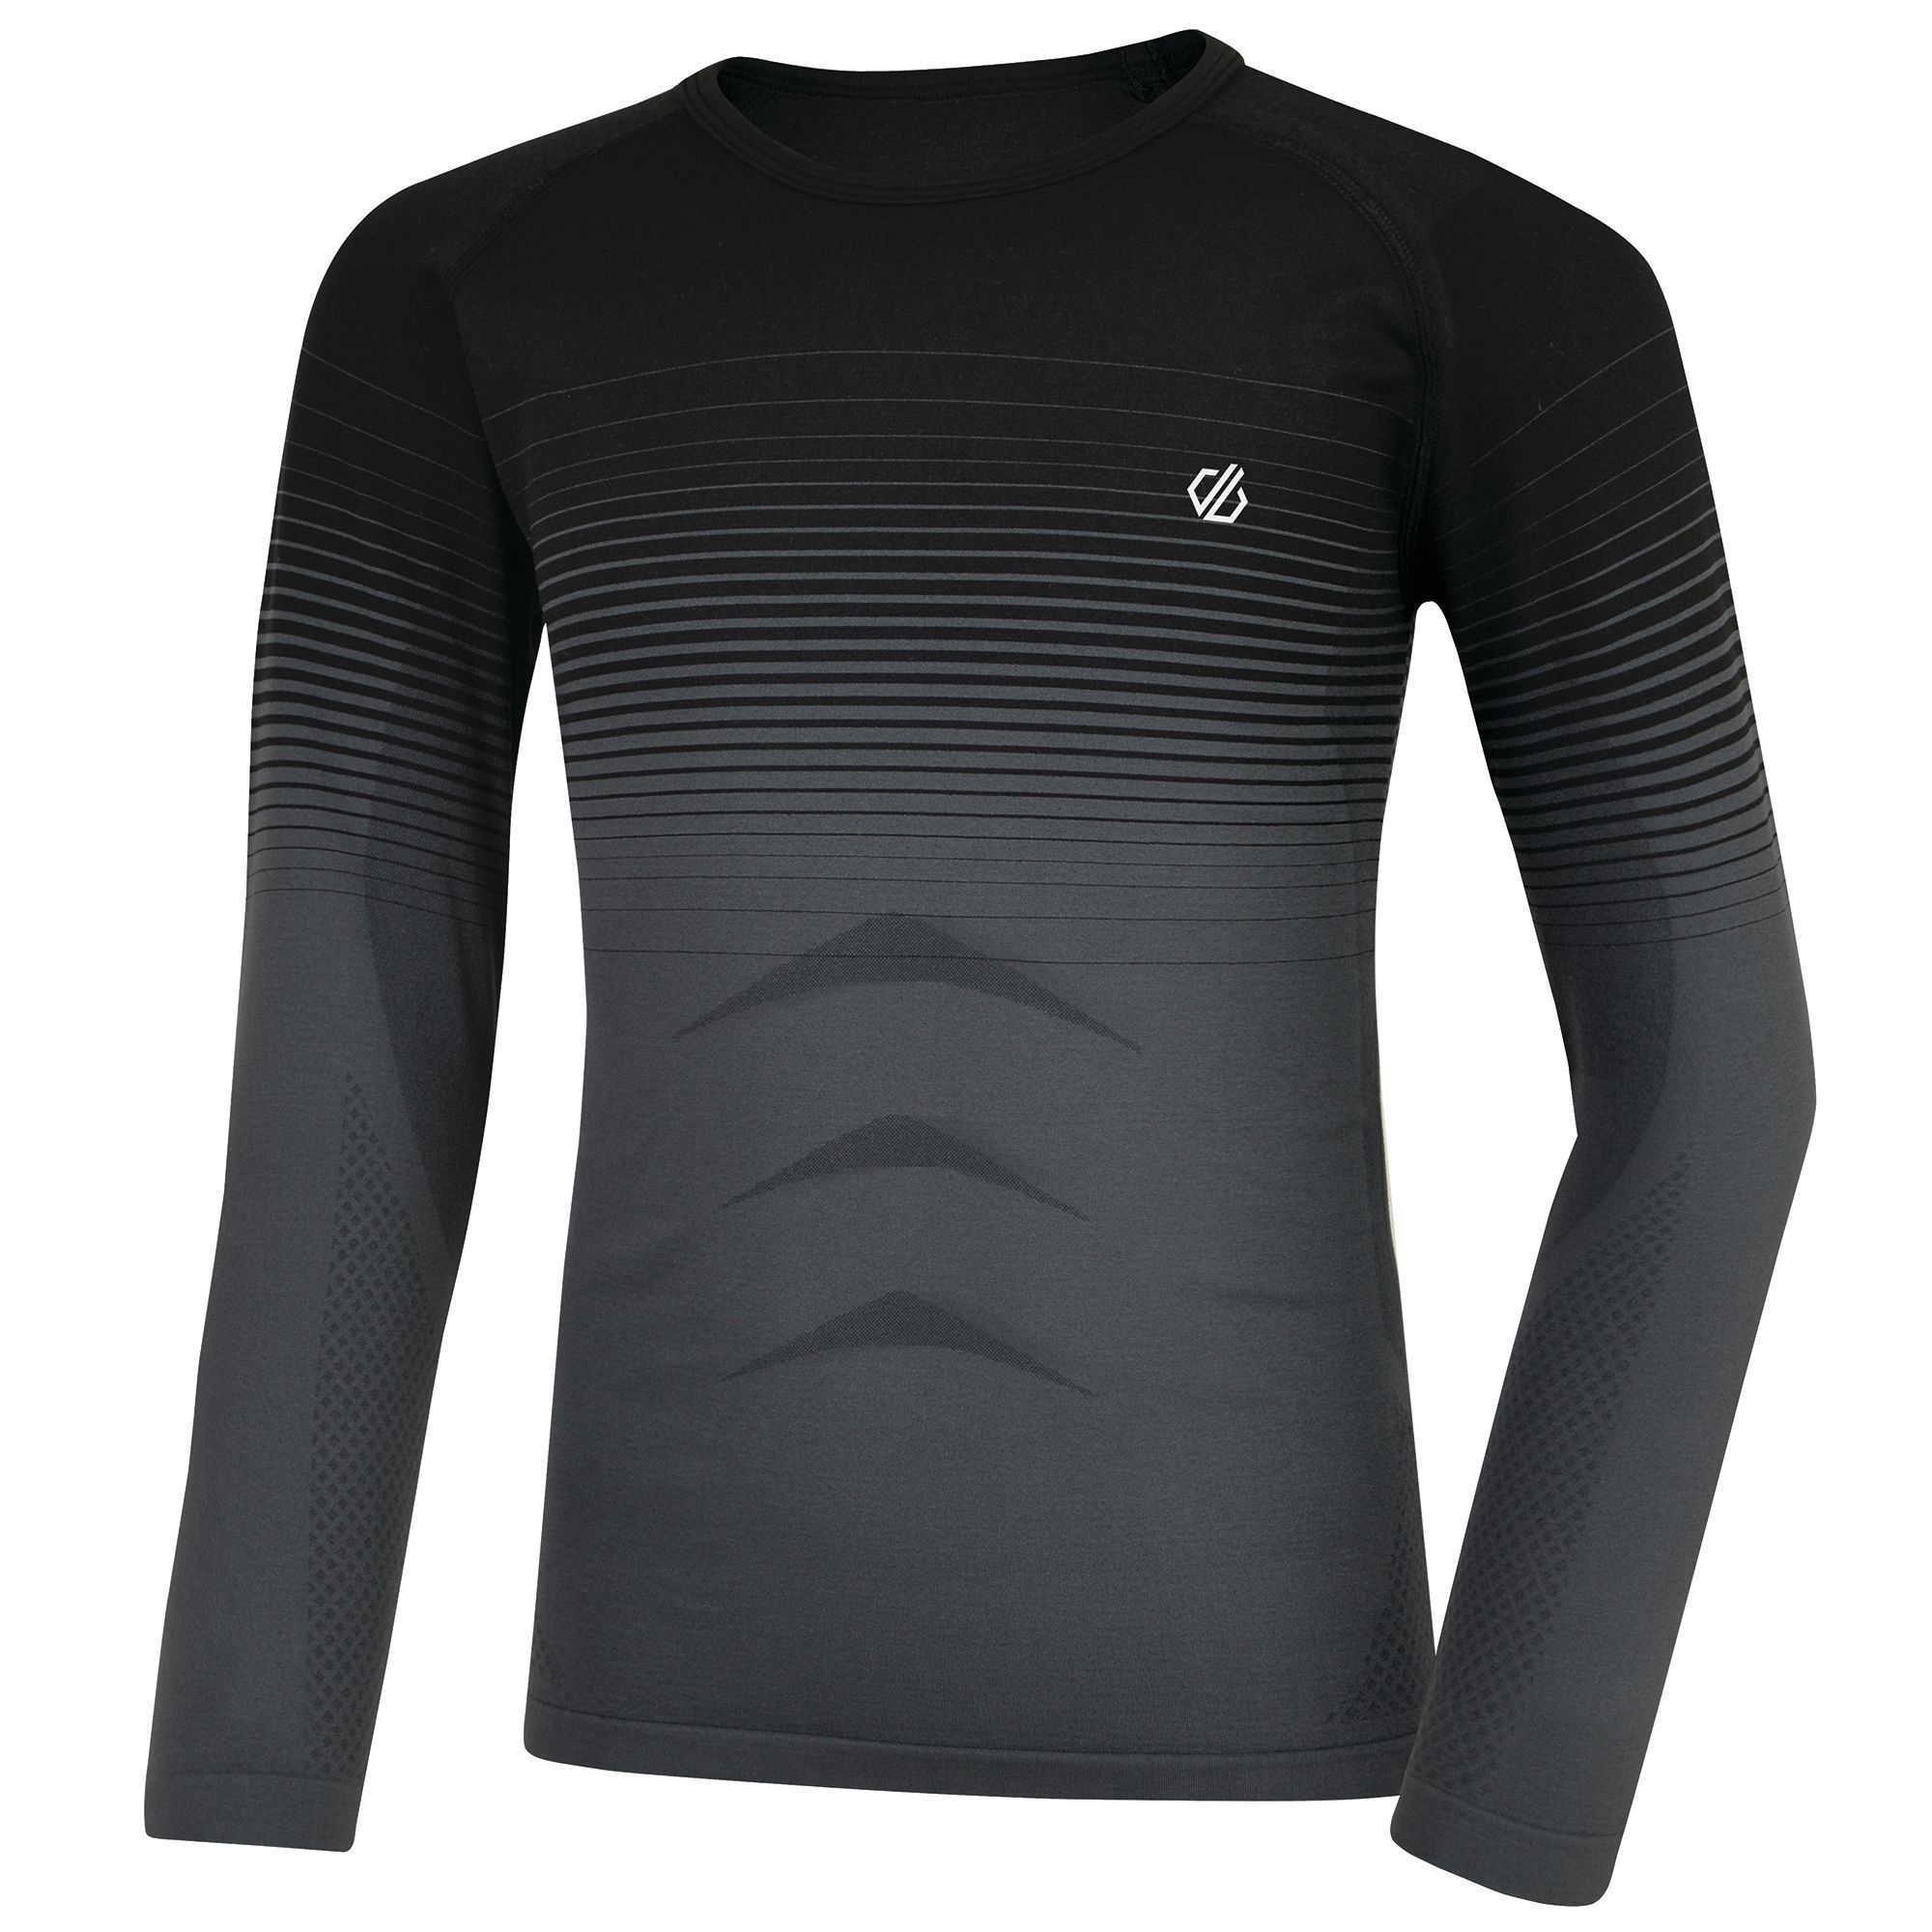 Elastane (8%), Polyester (42%), Polyamide (50%). Performance base layer collection. SeamSmart Technology. Q-Wic Seamless knitted fabric. Ergonomic body map fit. Fast wicking and quick drying properties.  odour control treatment. Dare 2B Kids Unisex Sizing (chest approx): 2 Years (22.5in/57cm), 3-4 Years (23in/58.5cm), 5-6 Years (23.5in/60cm), 7-8 Years (25in/64cm), 9-10 Years (27in/69cm), 11-12 Years (28in/71cm), 32